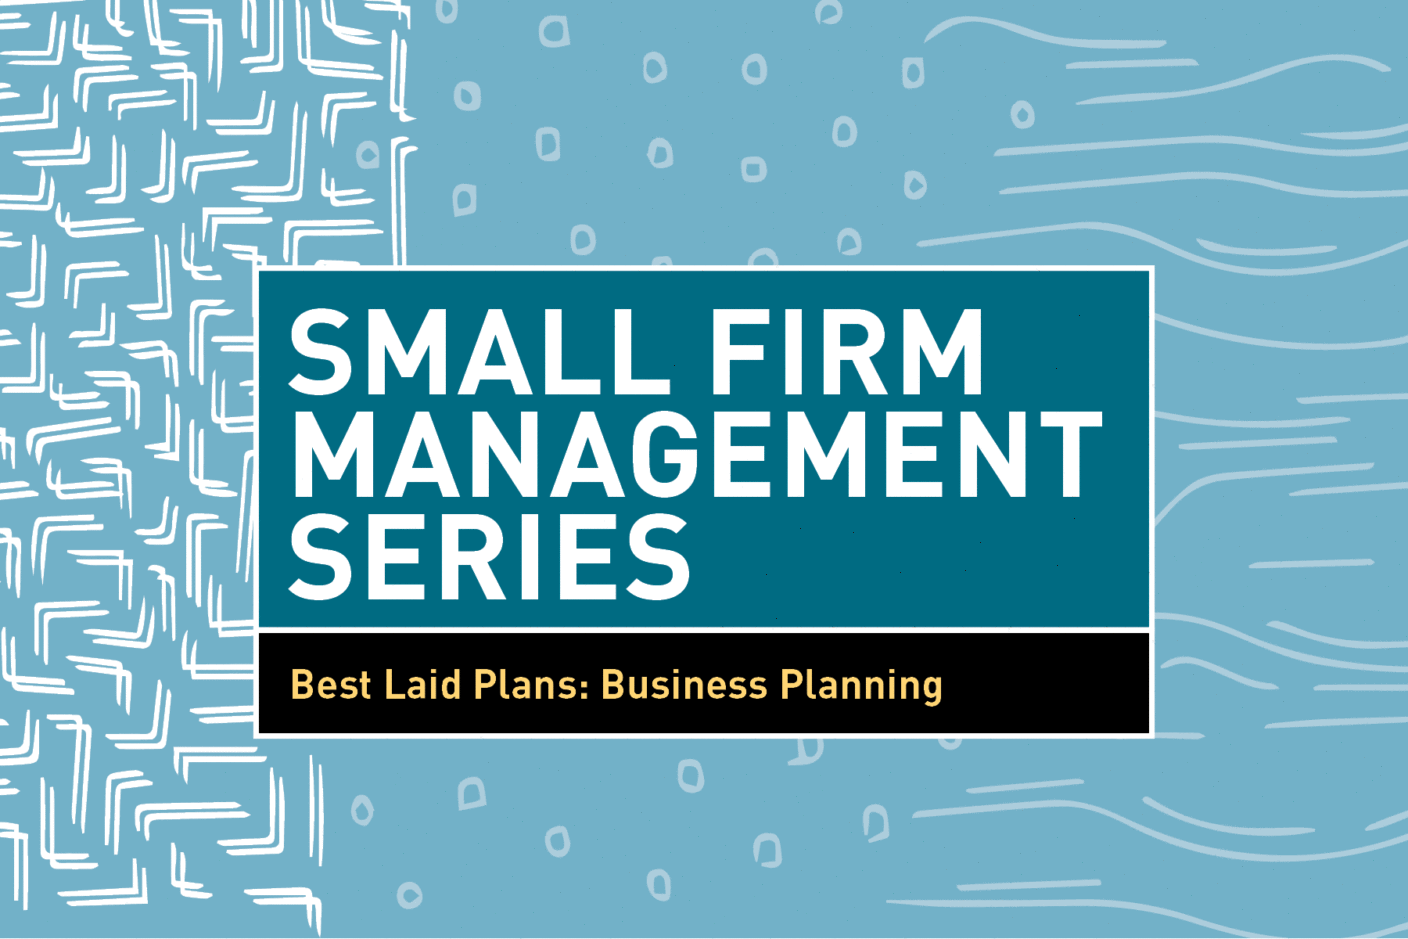 This page is intended only for participants of 2018 Small Firm Management Series: Best Laid Plans: Business Planning for Small Firm Architects